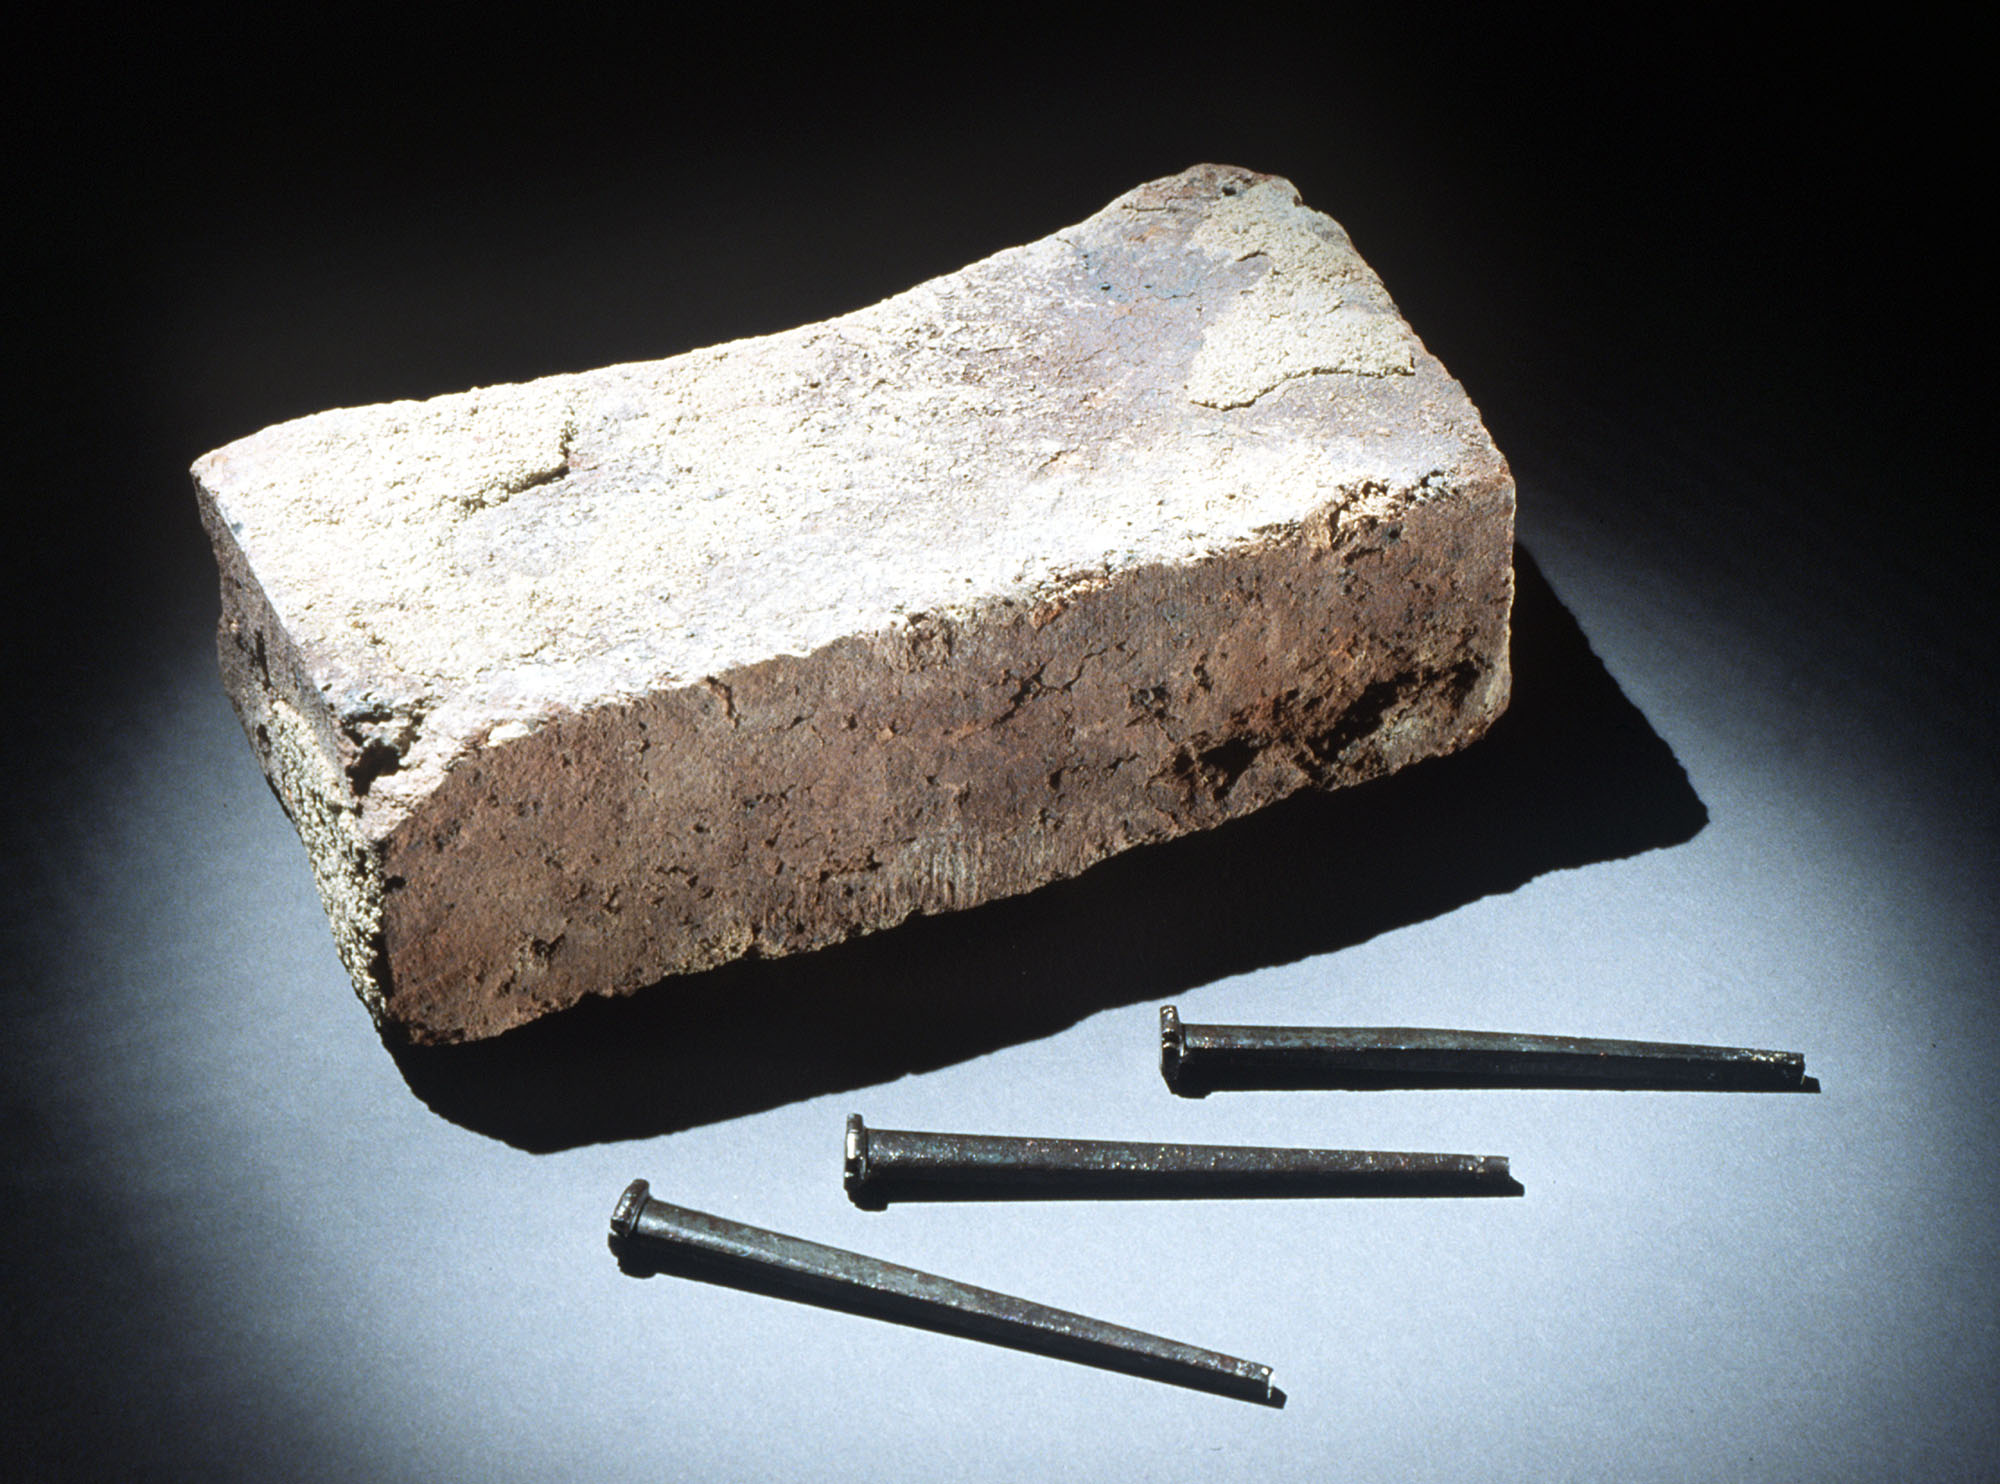 Photograph shows a brick that was removed from Tompkins Hall, Tuskegee Institute, Alabama and nails made by students at Tuskegee Institute to build its chapel